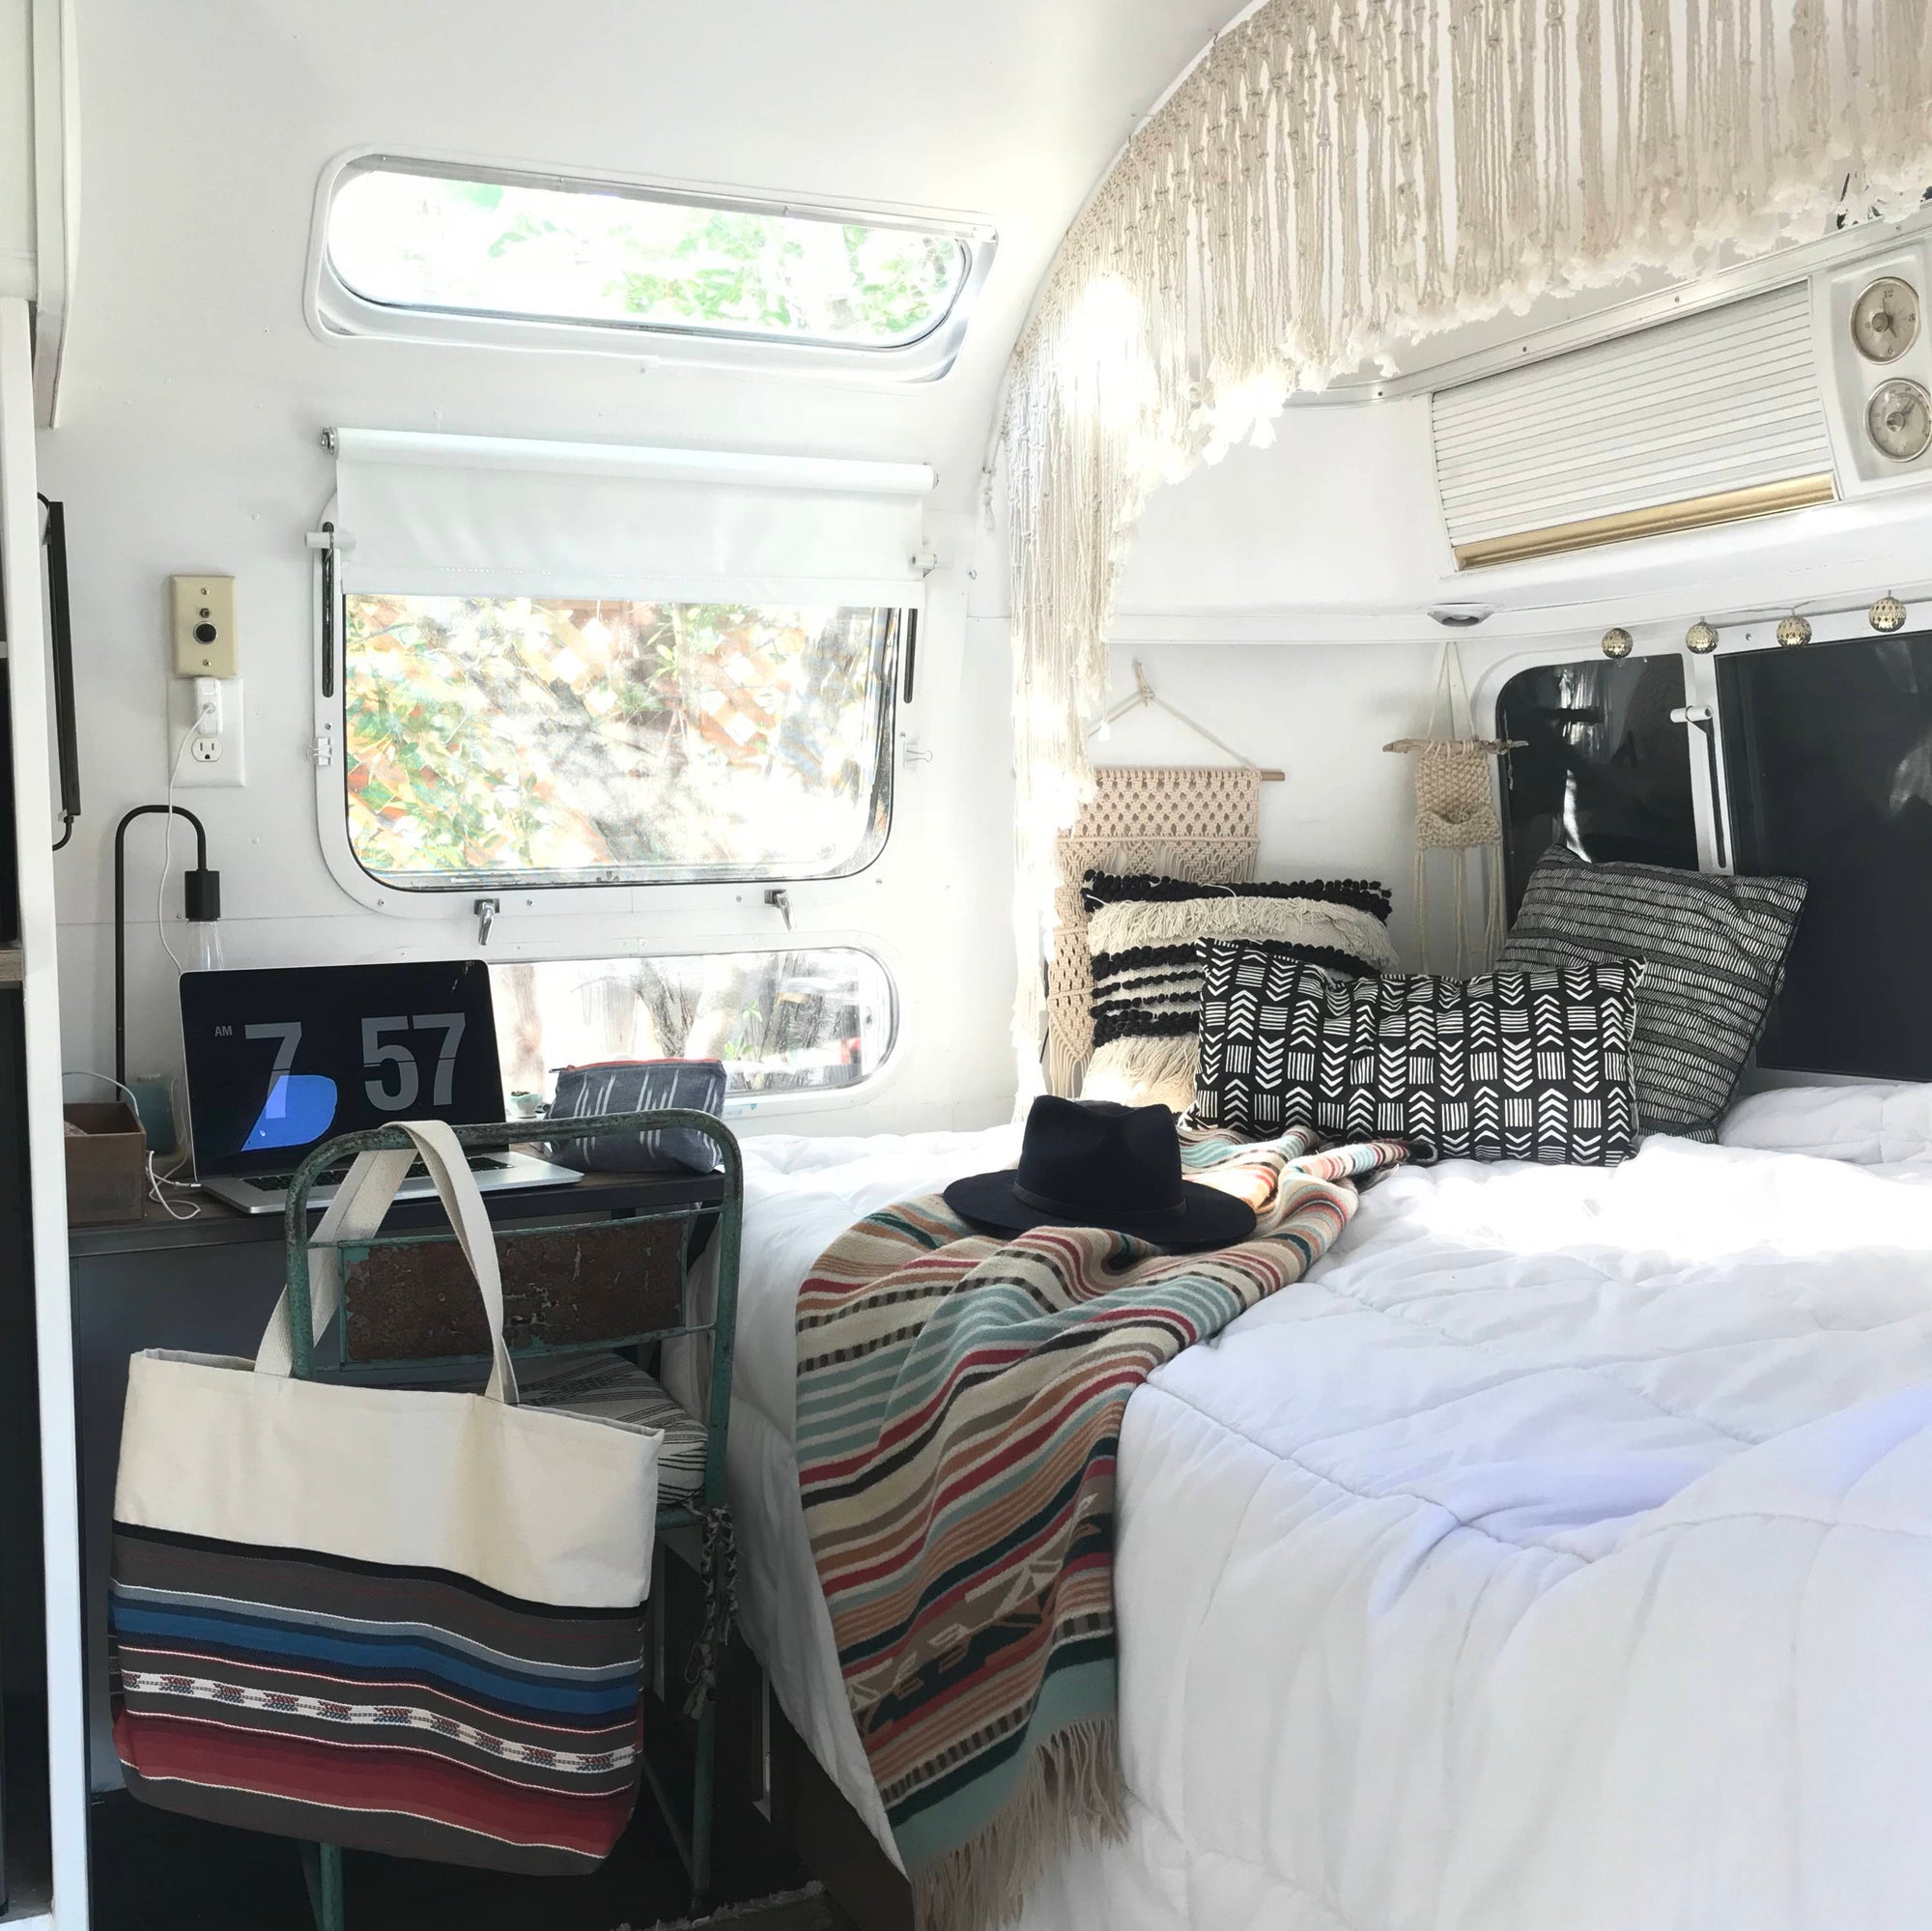 Downsizing into an Airstream